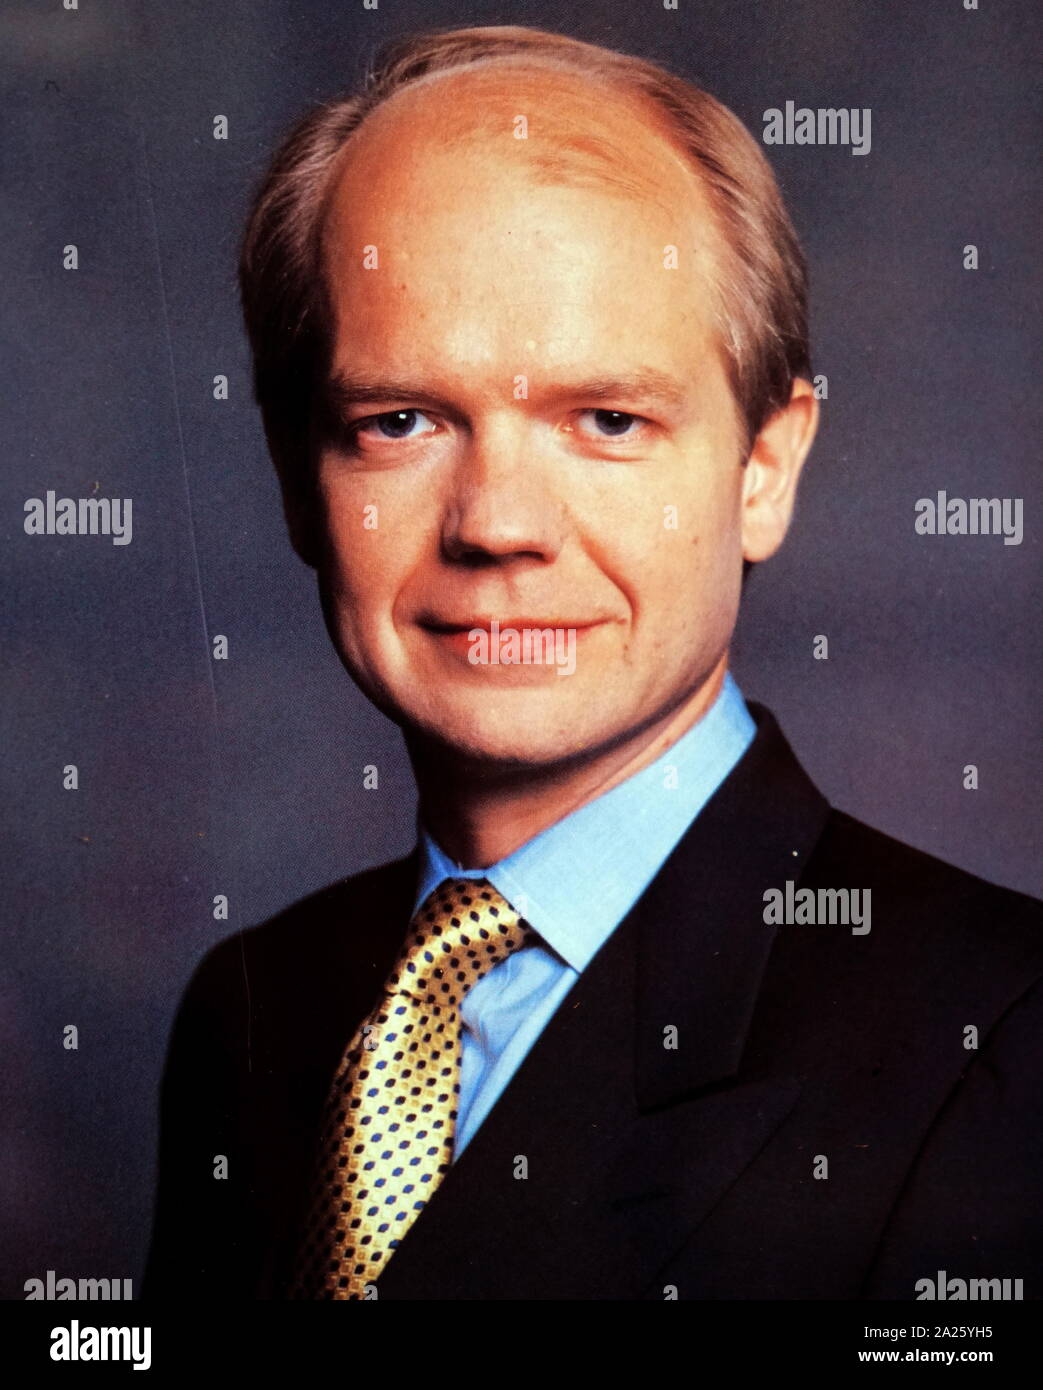 Photograph of William Hague (1961-) a British Conservative politician and former Secretary of State for Foreign Affairs. Stock Photo